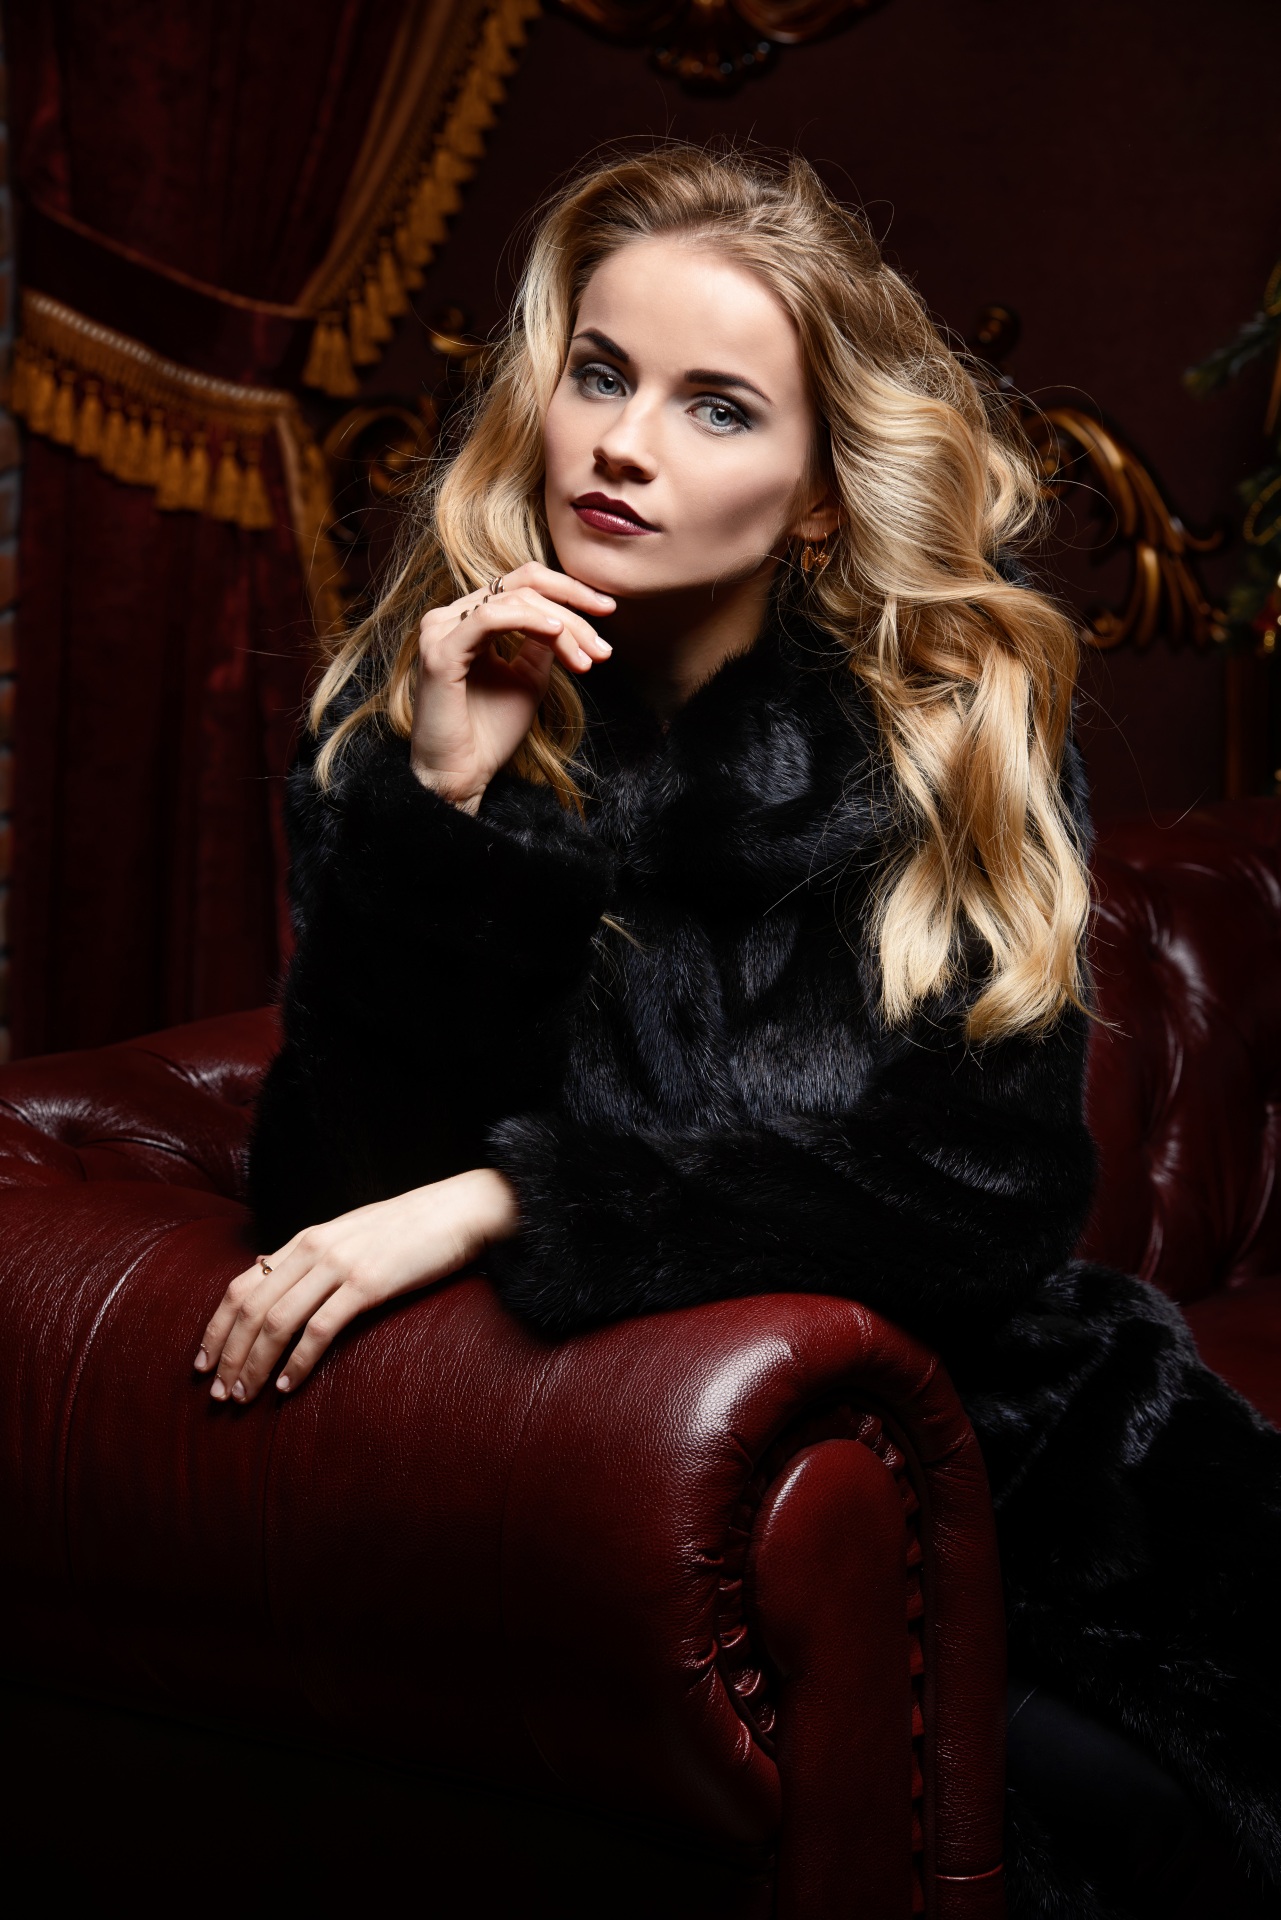 People 1281x1920 women long hair blonde coats portrait display couch black coat glamour classy